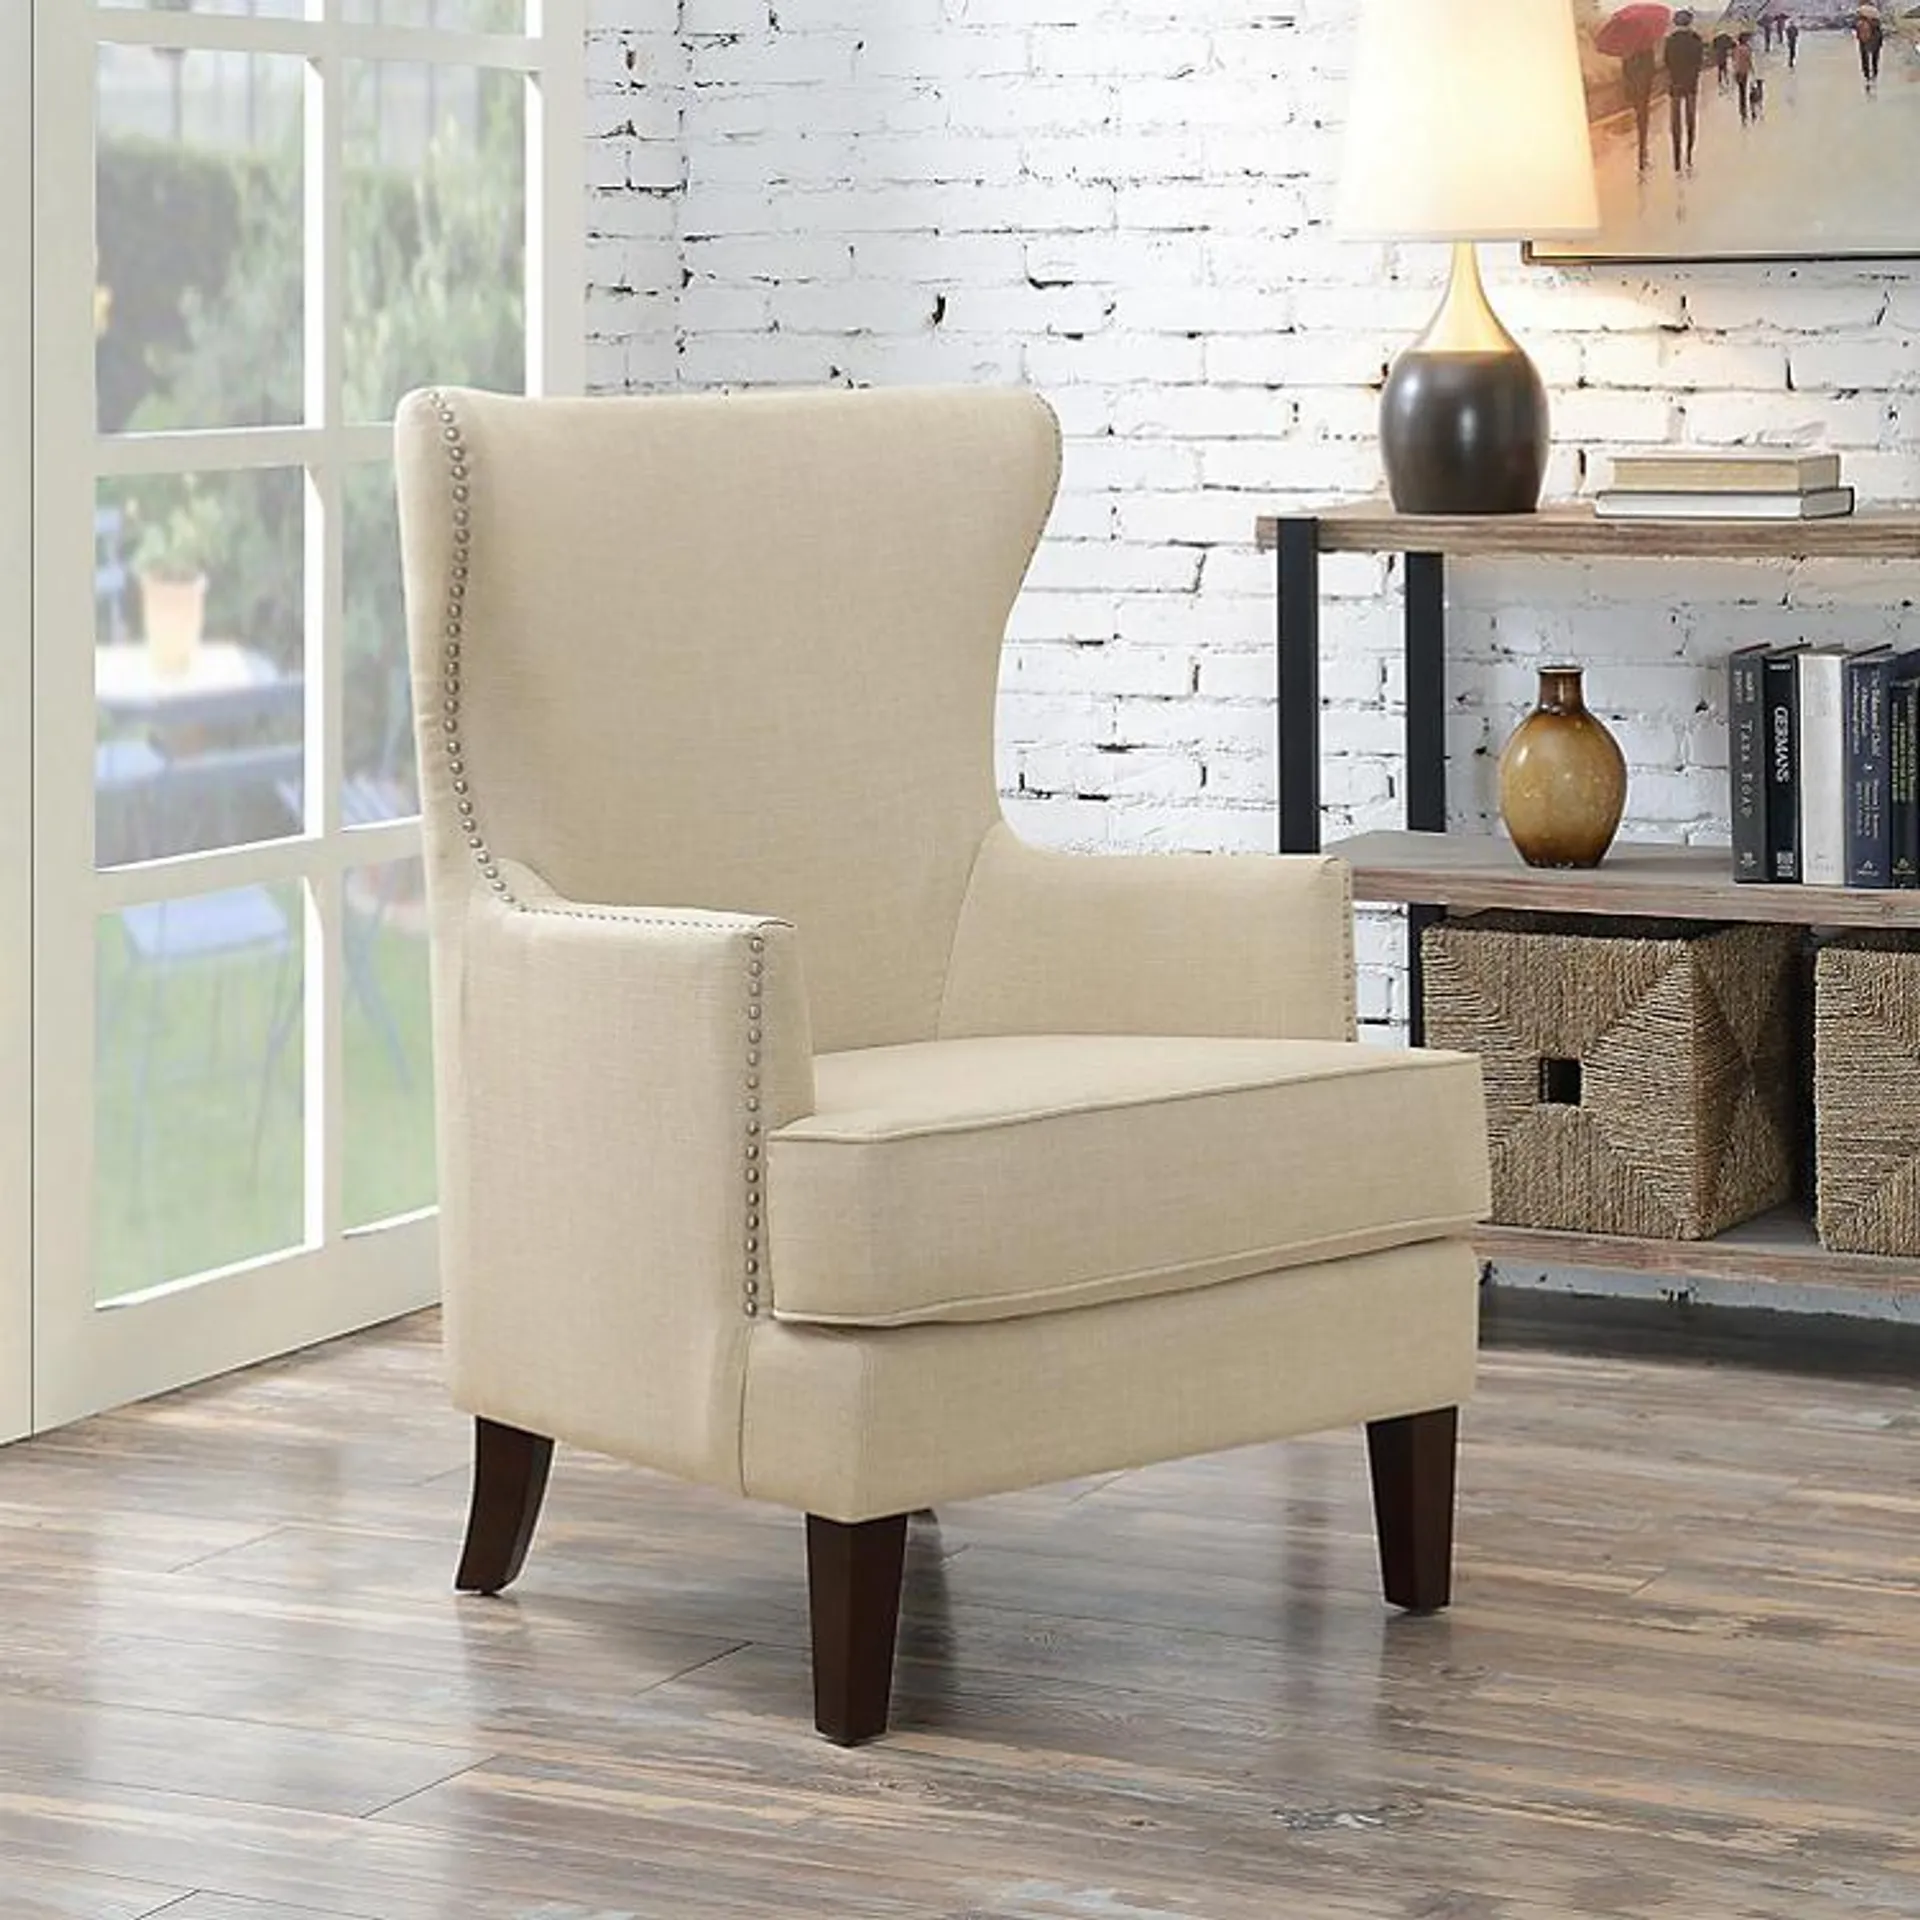 Society Den Avery Accent Arm Chair, Assorted Colors